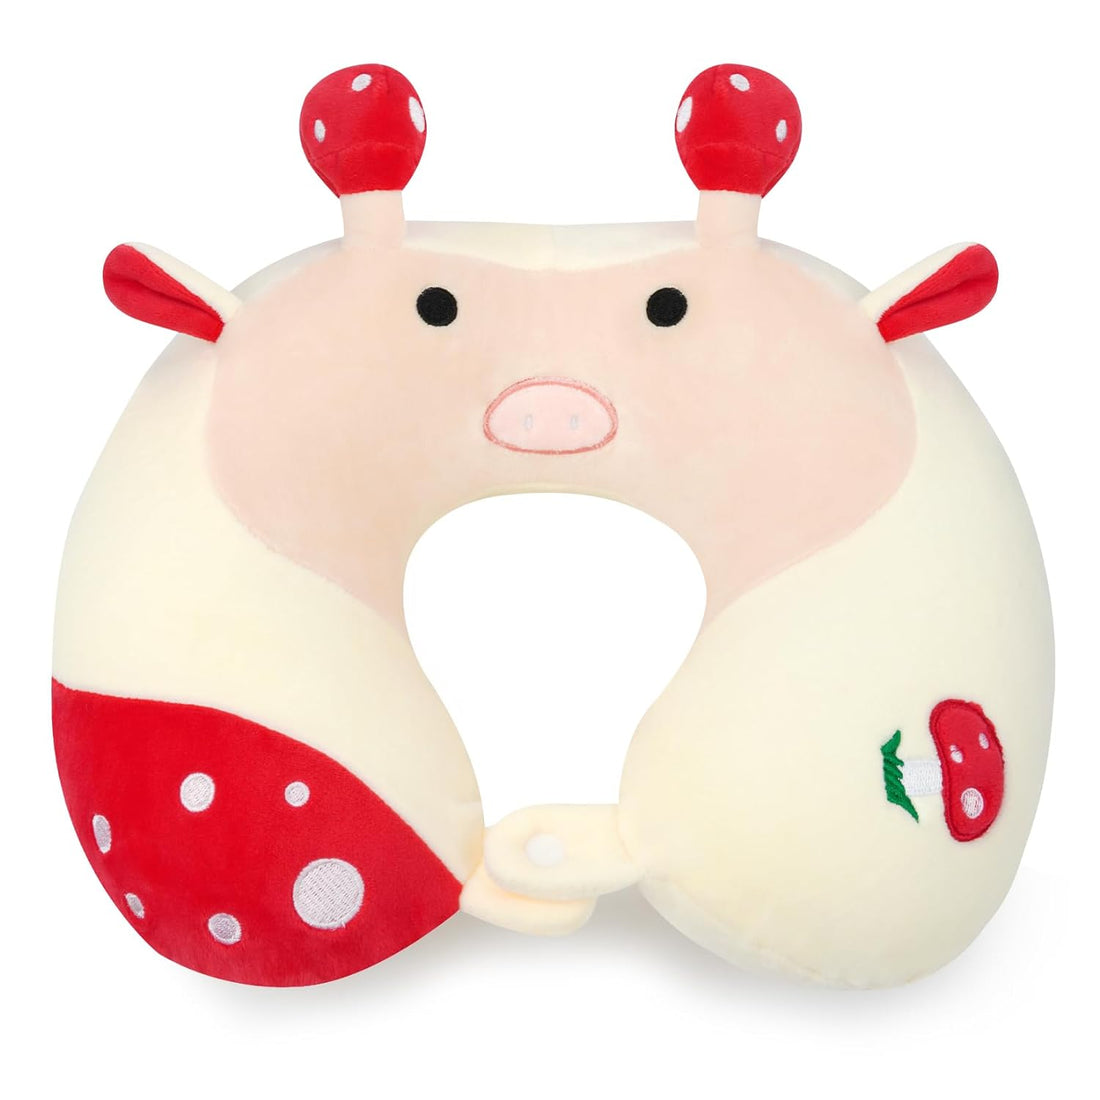 Zcstioxl Cute Kids Travel Pillow, Airplane Neck Pillows for Traveling, Animal Flight Pillow, Memory Foam Travel Pillow for Airplanes Pillow Gifts for Girls Boys Adults- Mushroom Cow